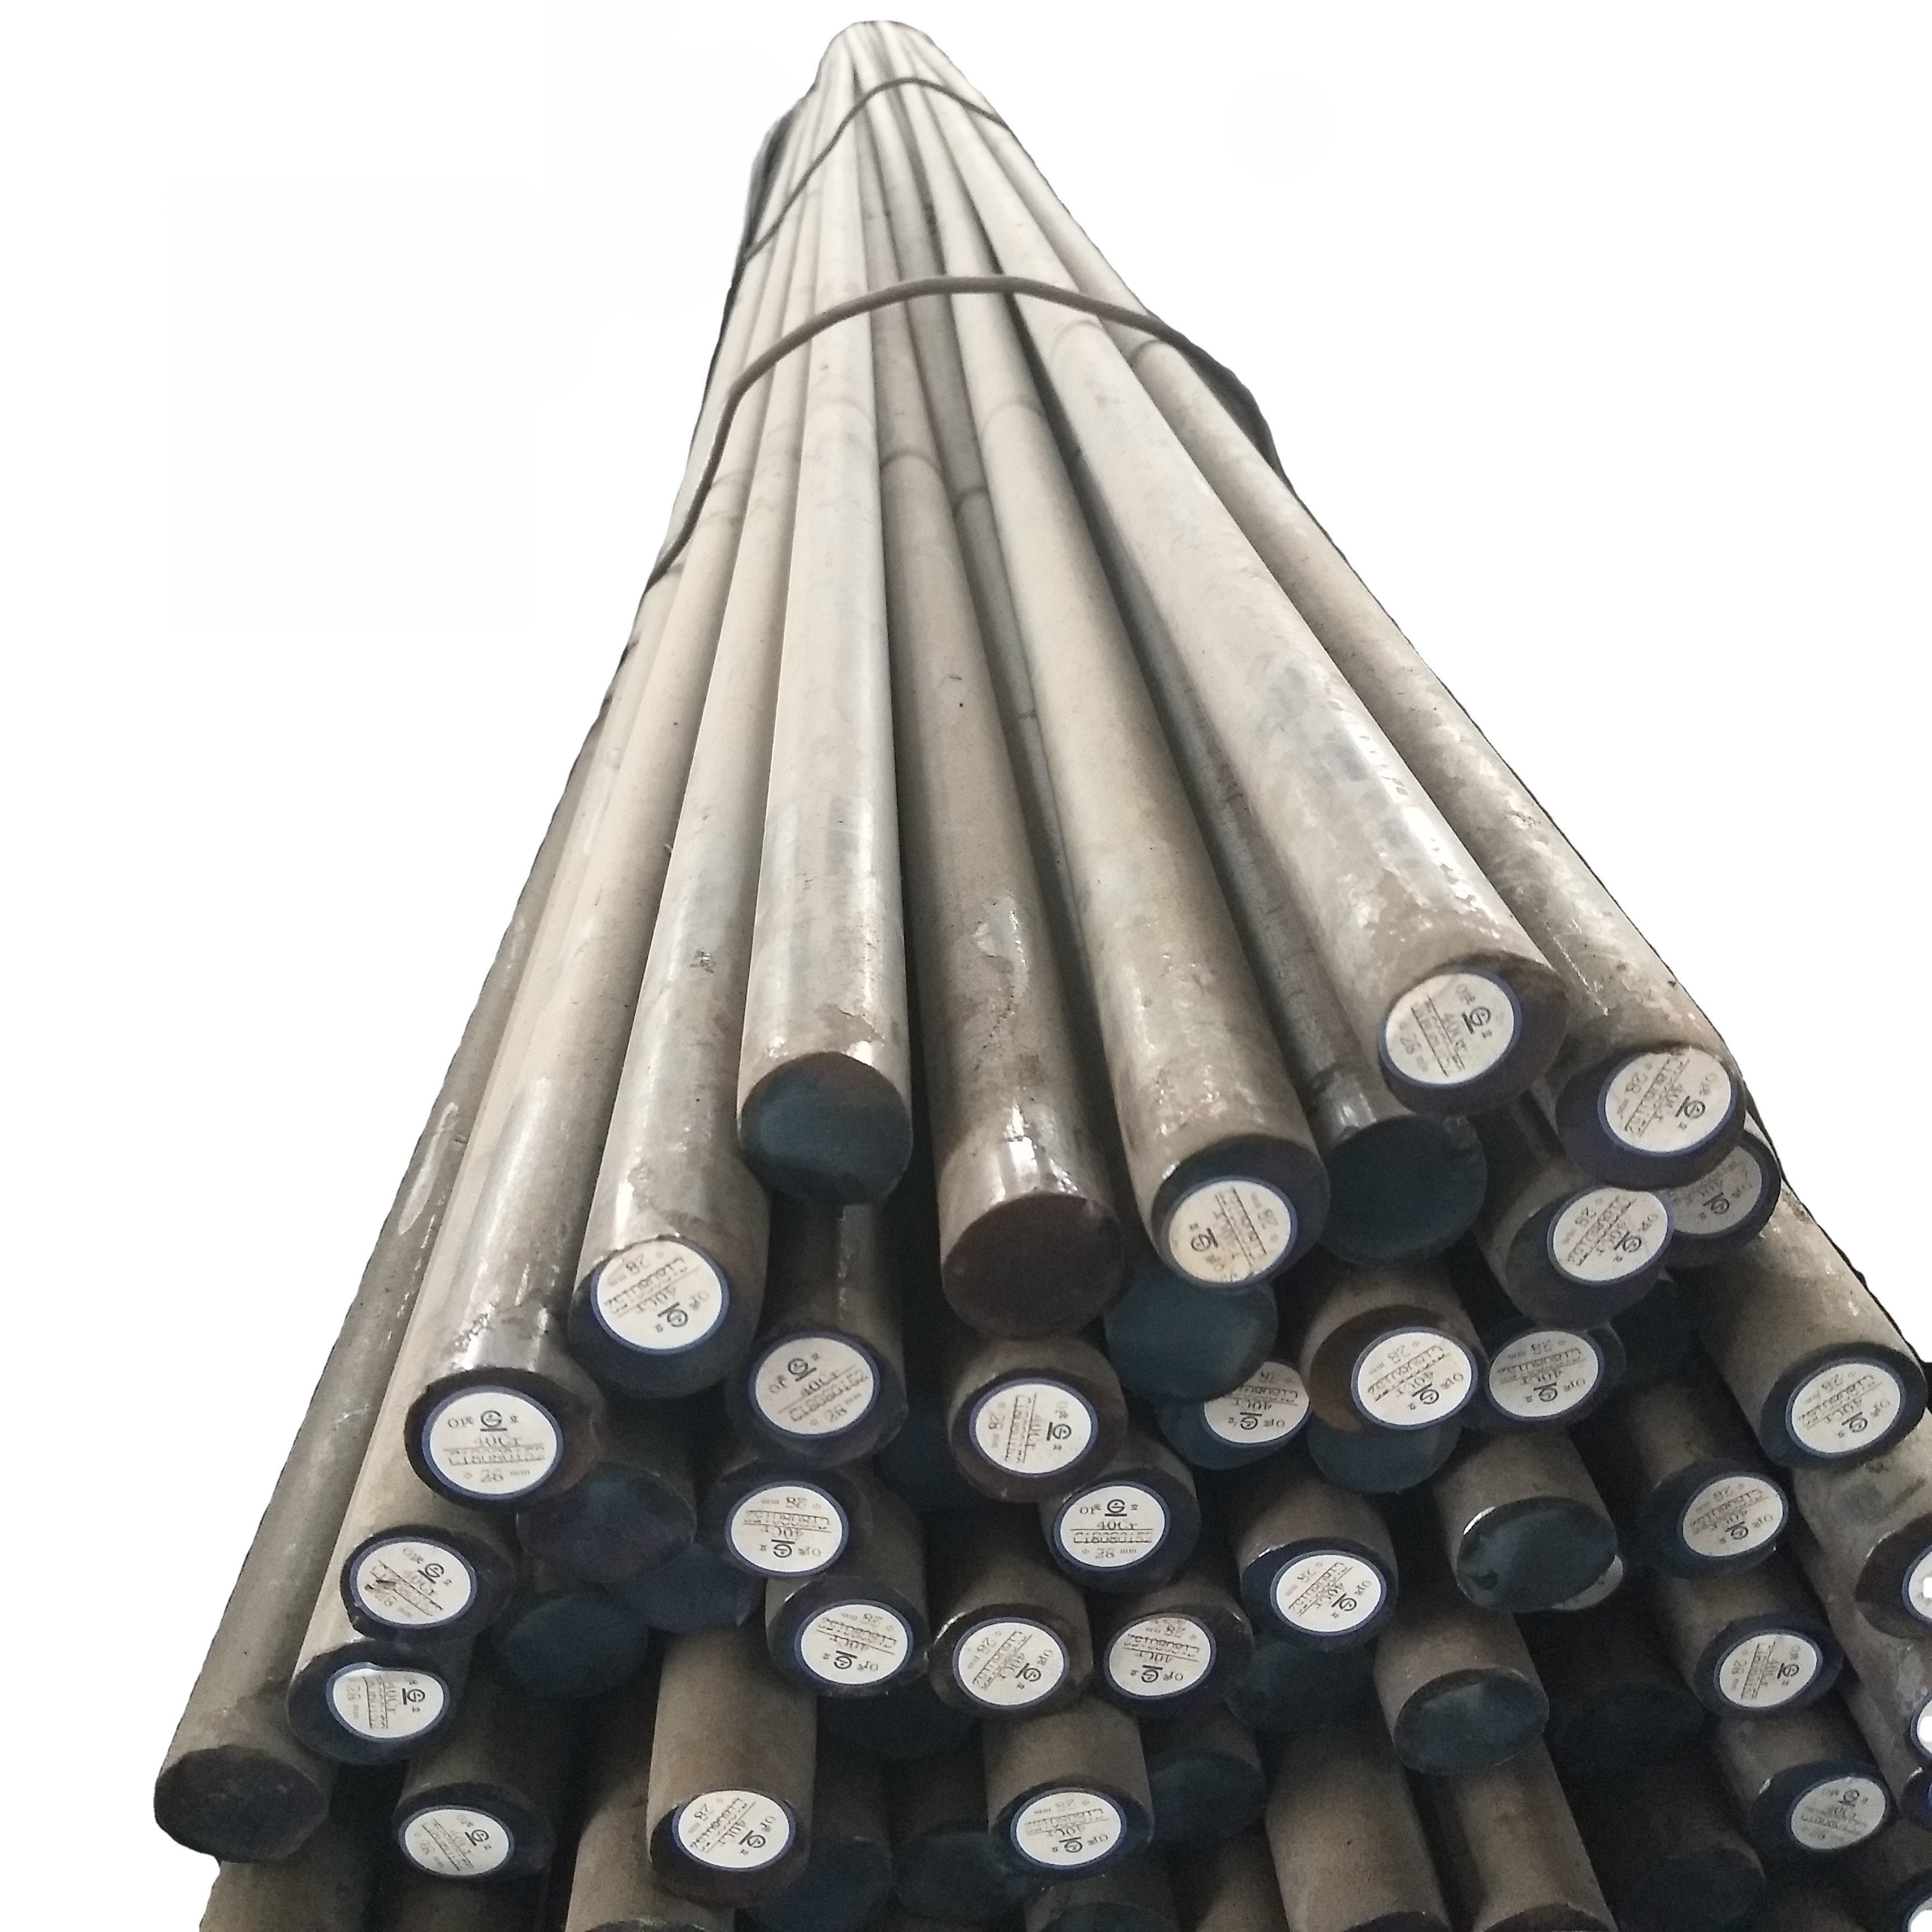 Steel industry sees increase in demand for wire rod products